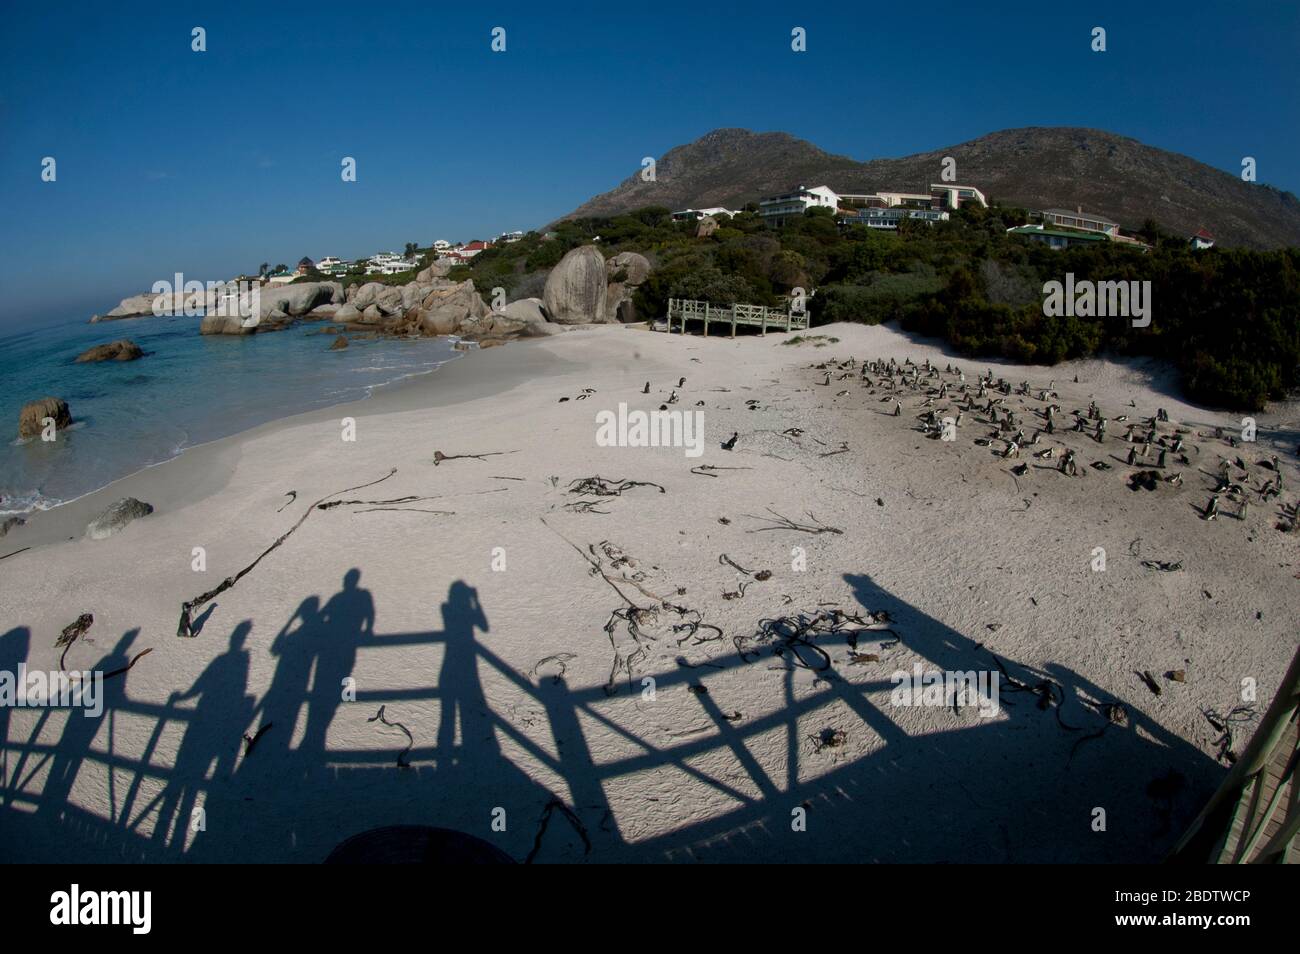 African Penguins, Spheniscus demersus, rookery on beach from viewing platform with shadows and houses in background, Boulders, near Cape Town Stock Photo